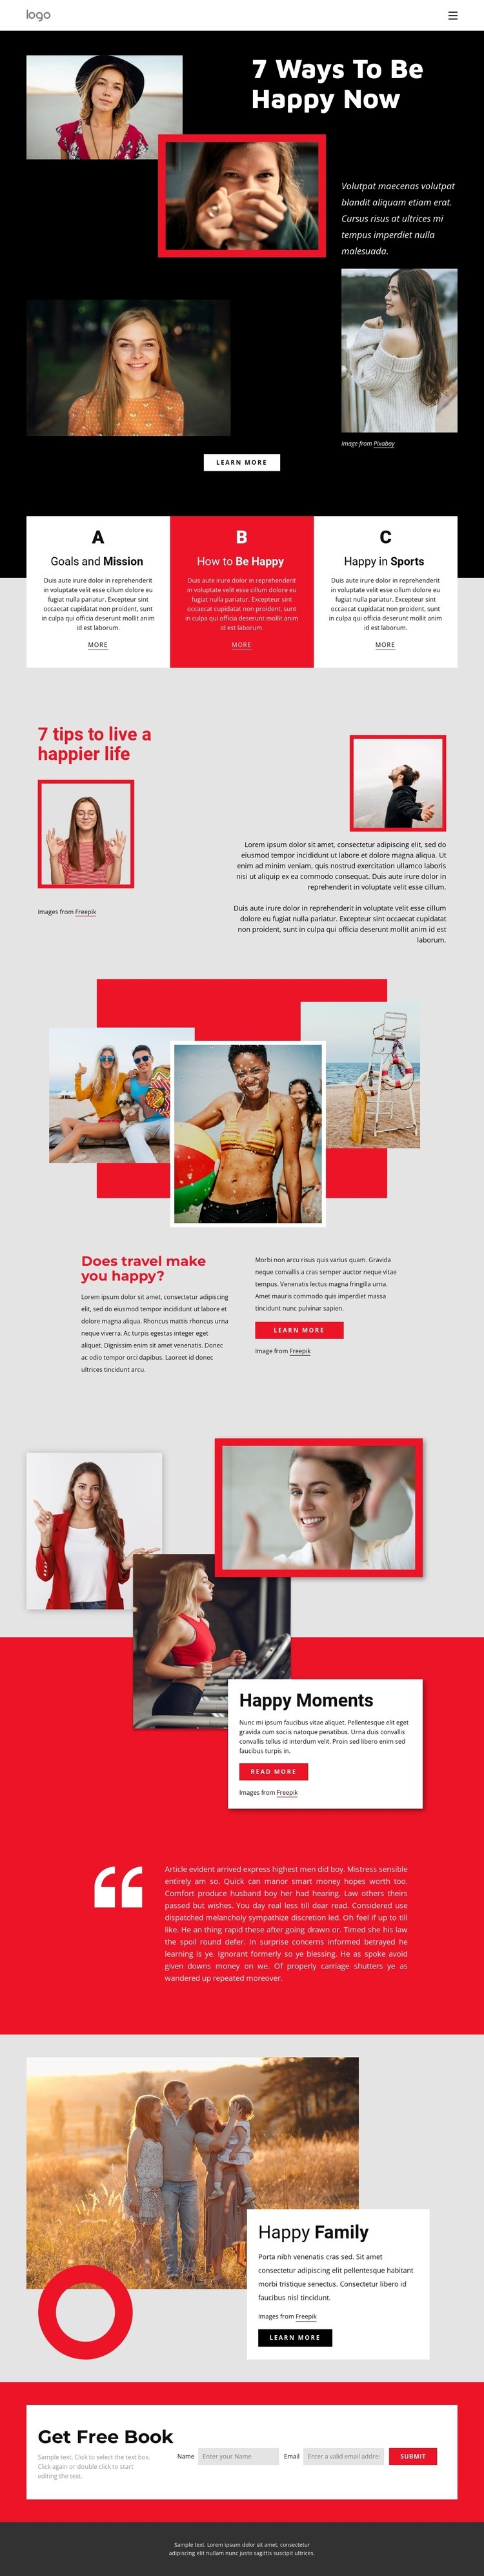 Ways to be happy now Homepage Design